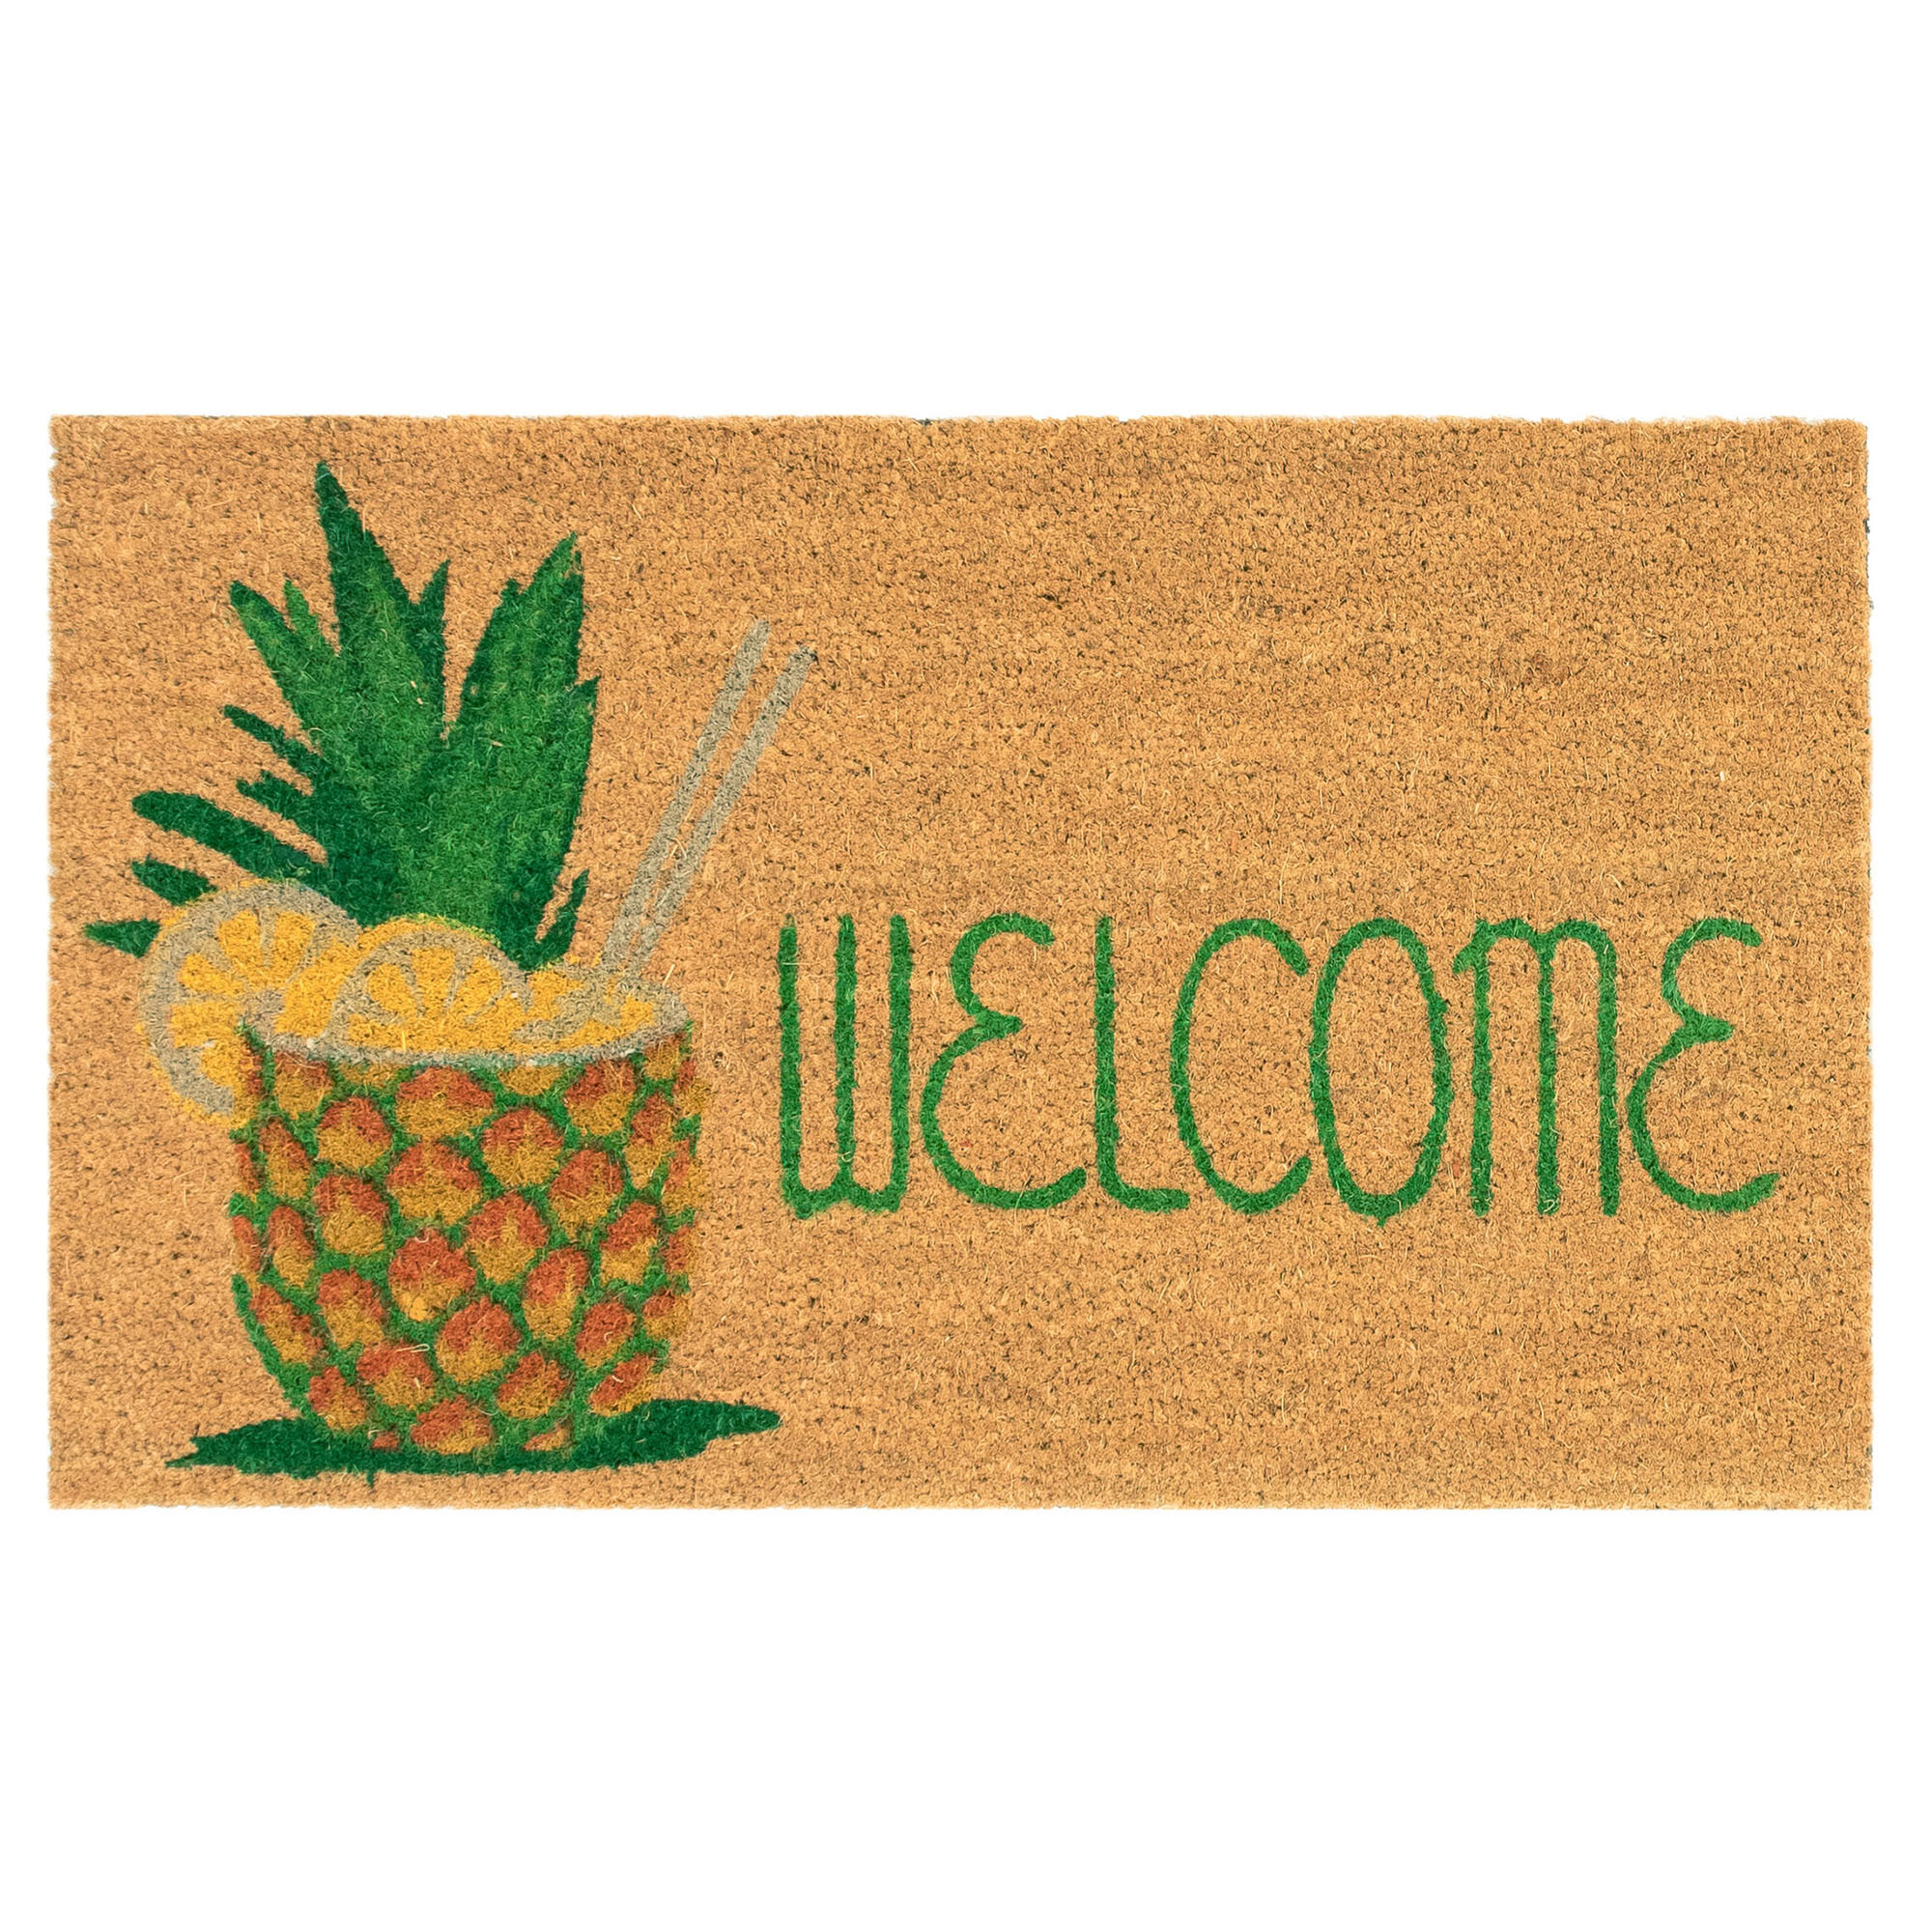 pineapple symbolizes welcome and hospitality